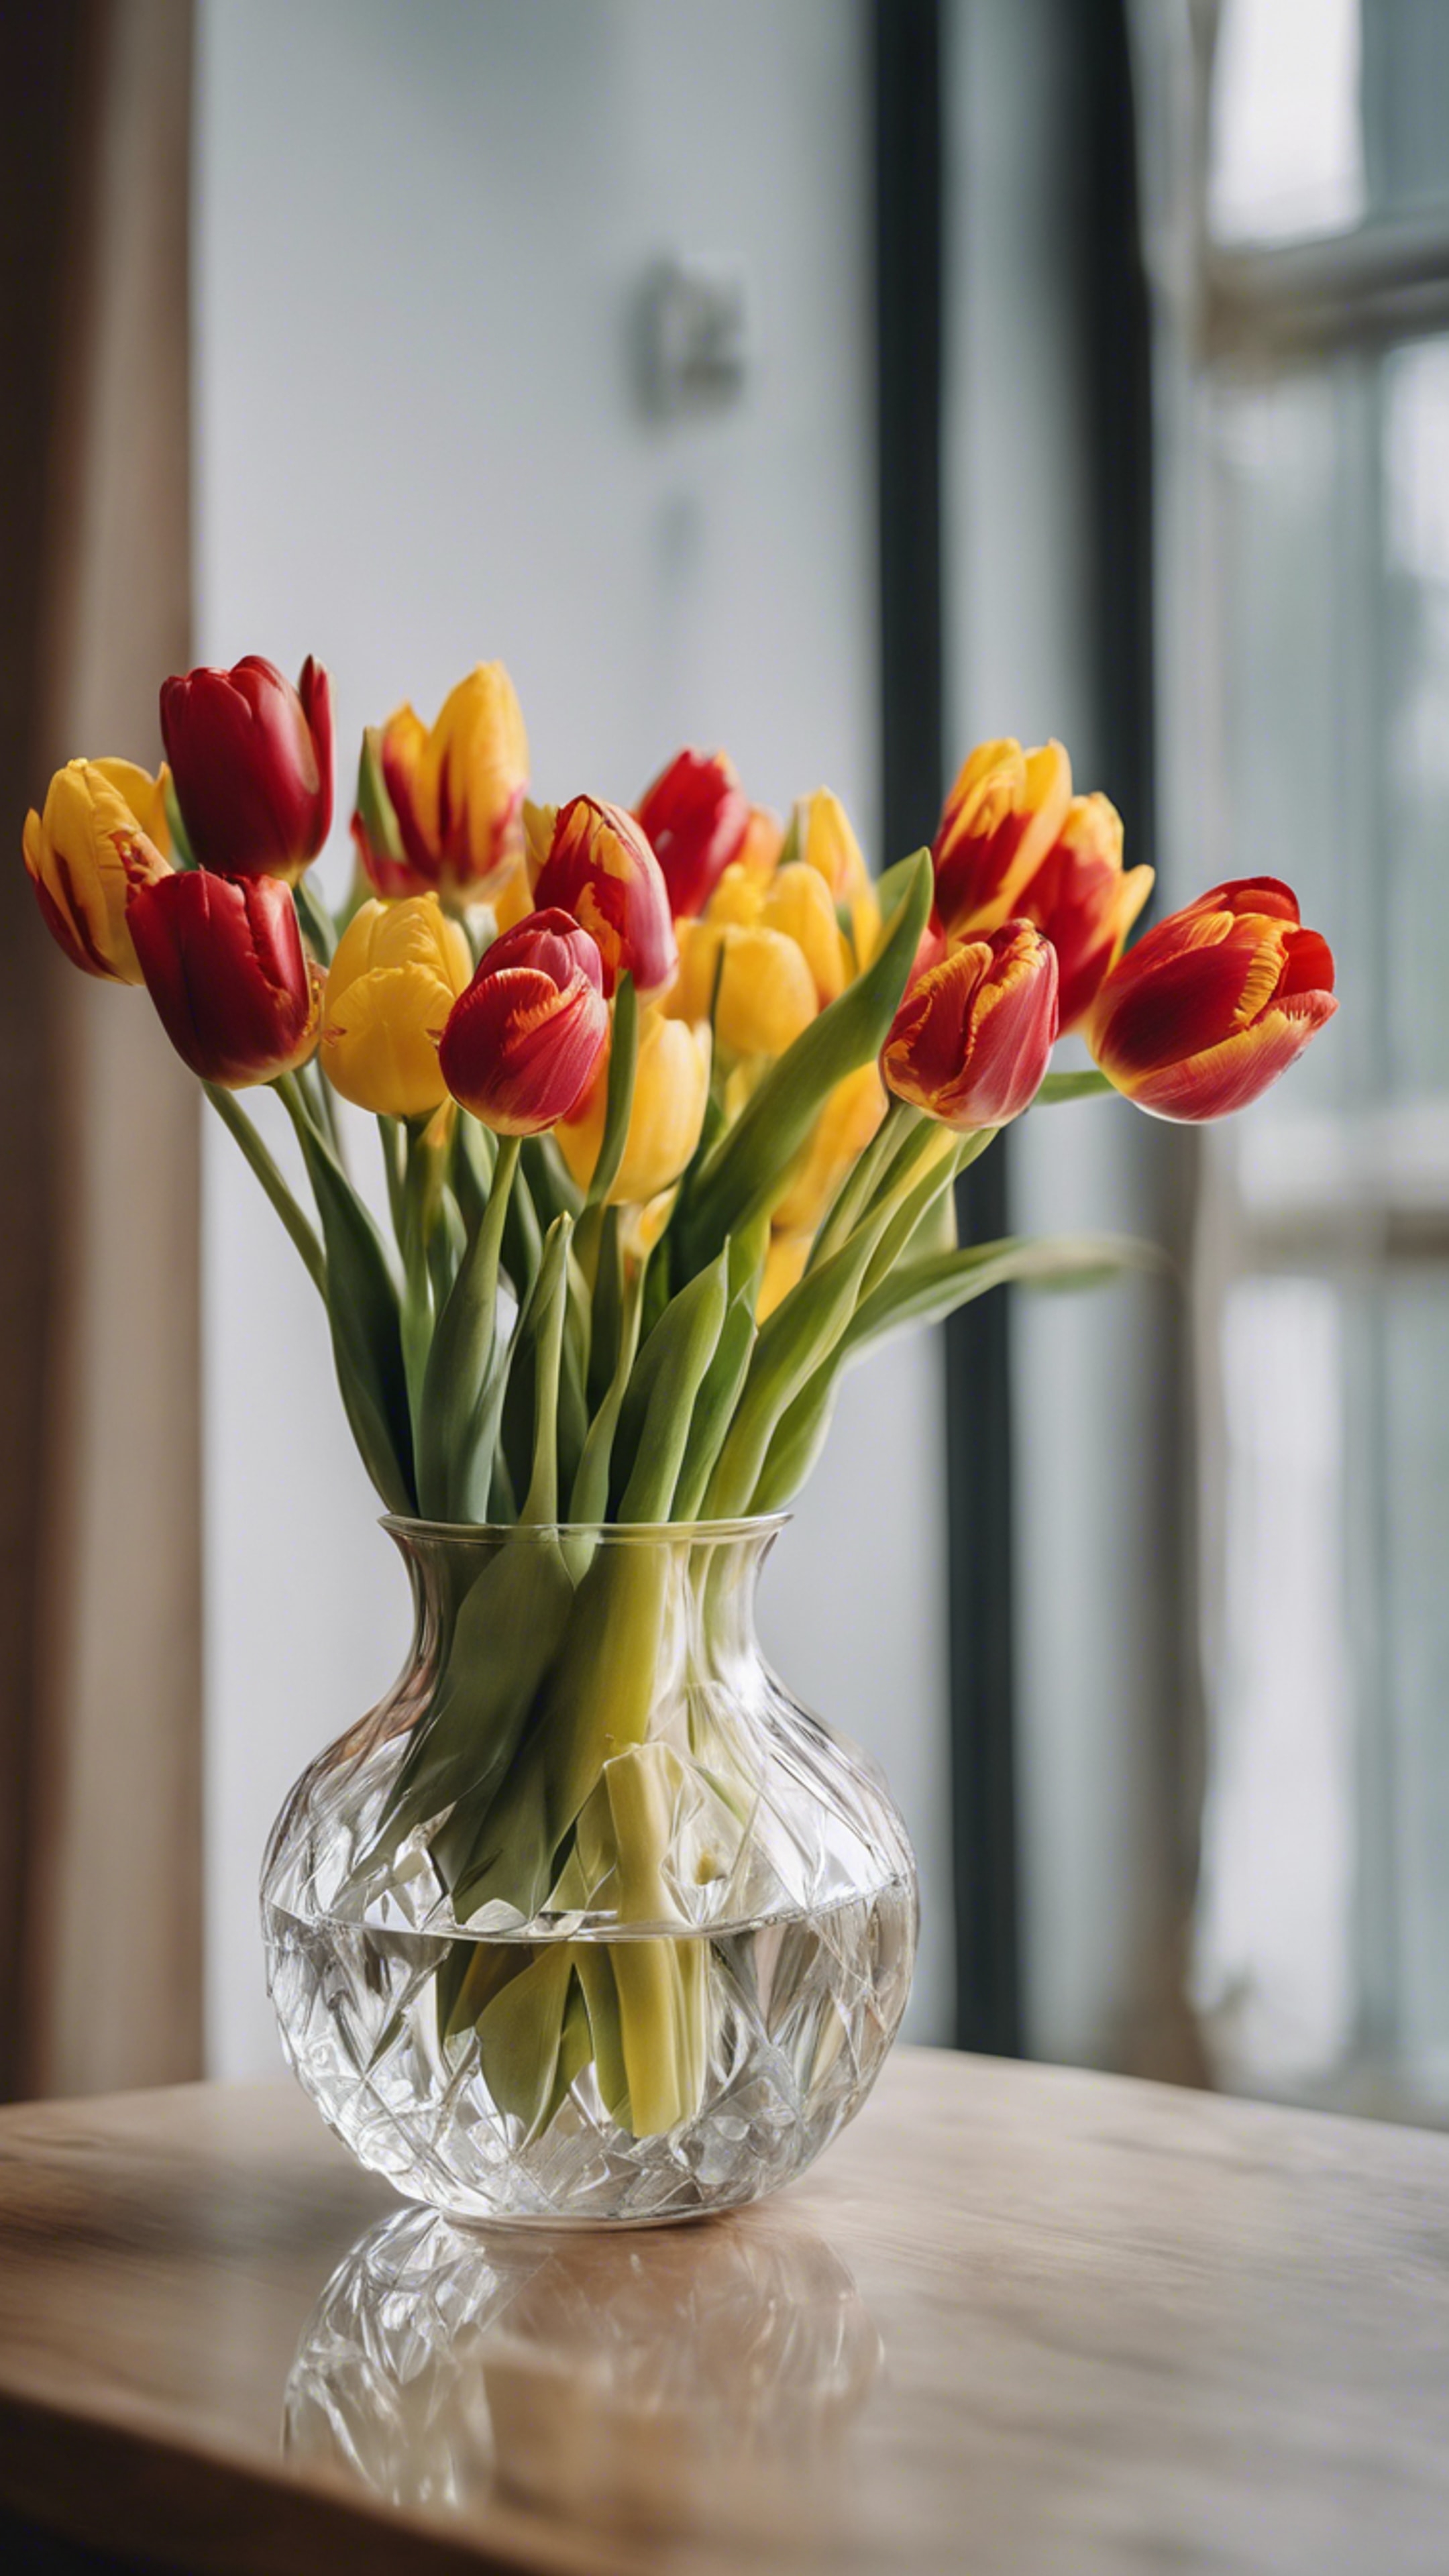 A bunch of fresh red and yellow tulips resting in a crystal clear vase. Wallpaper[770eab0b3cc545c1af9b]